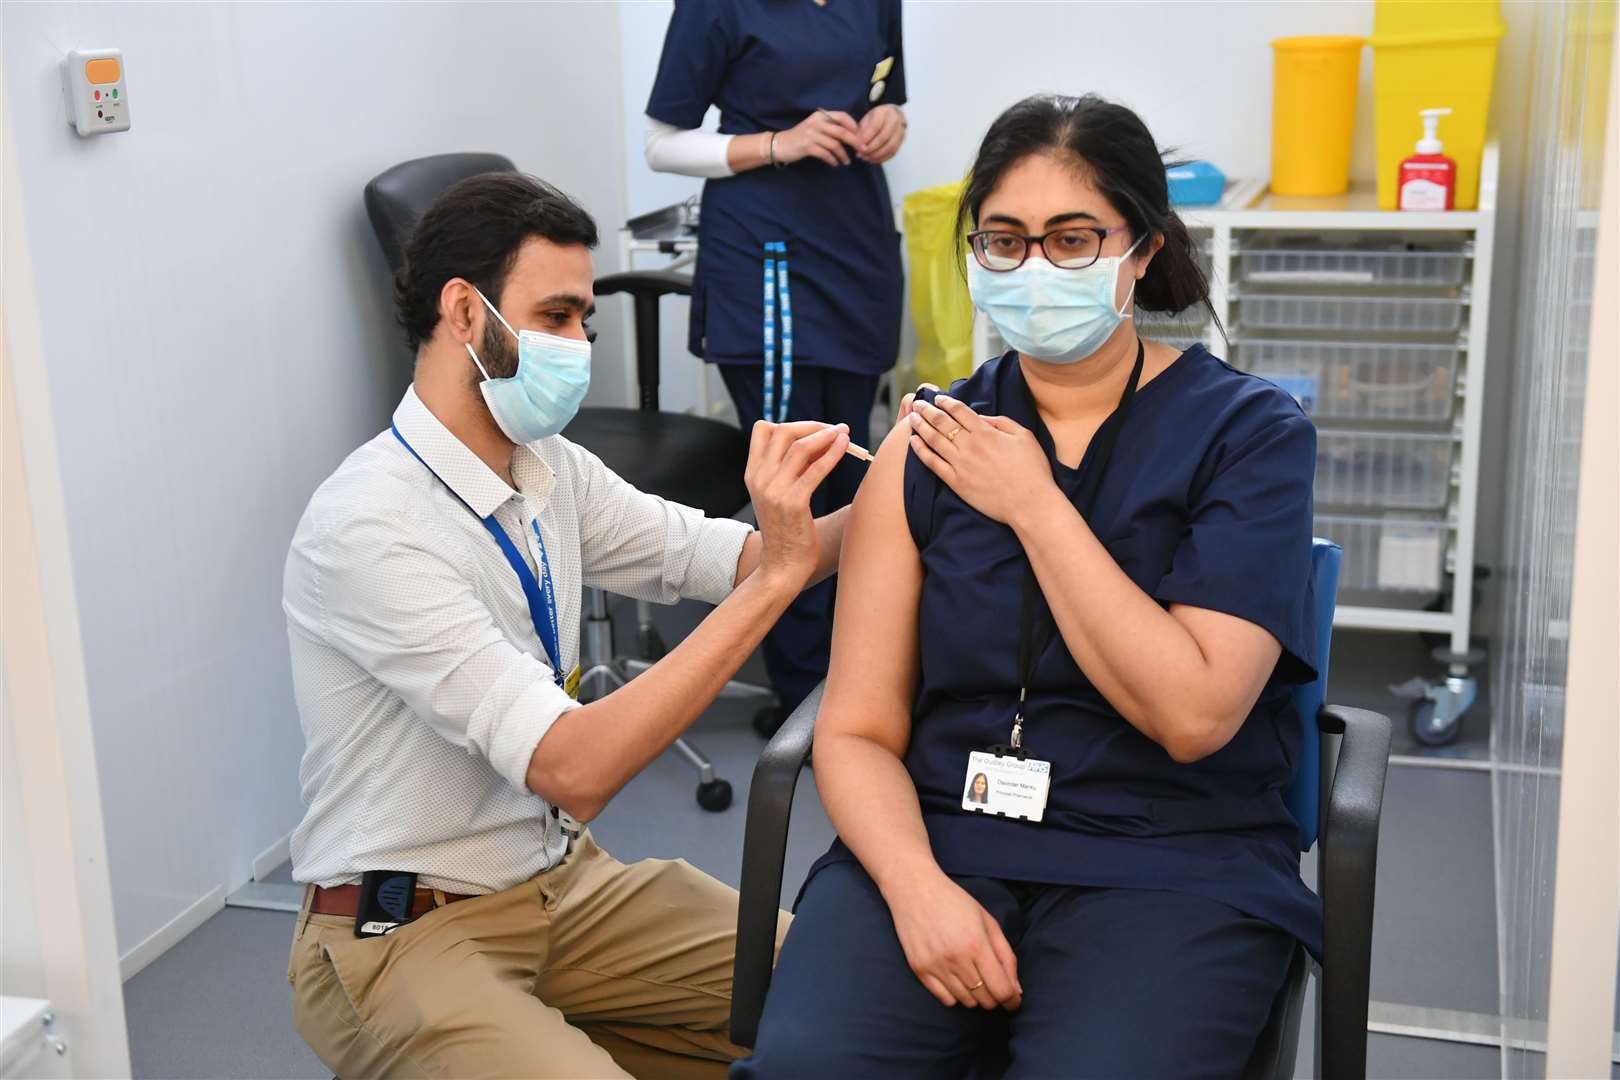 Principal pharmacist Davinder Manku (right) receives an injection of the Oxford/AstraZeneca coronavirus vaccine at The Black Country Living Museum in Dudley (Jacob King/PA)